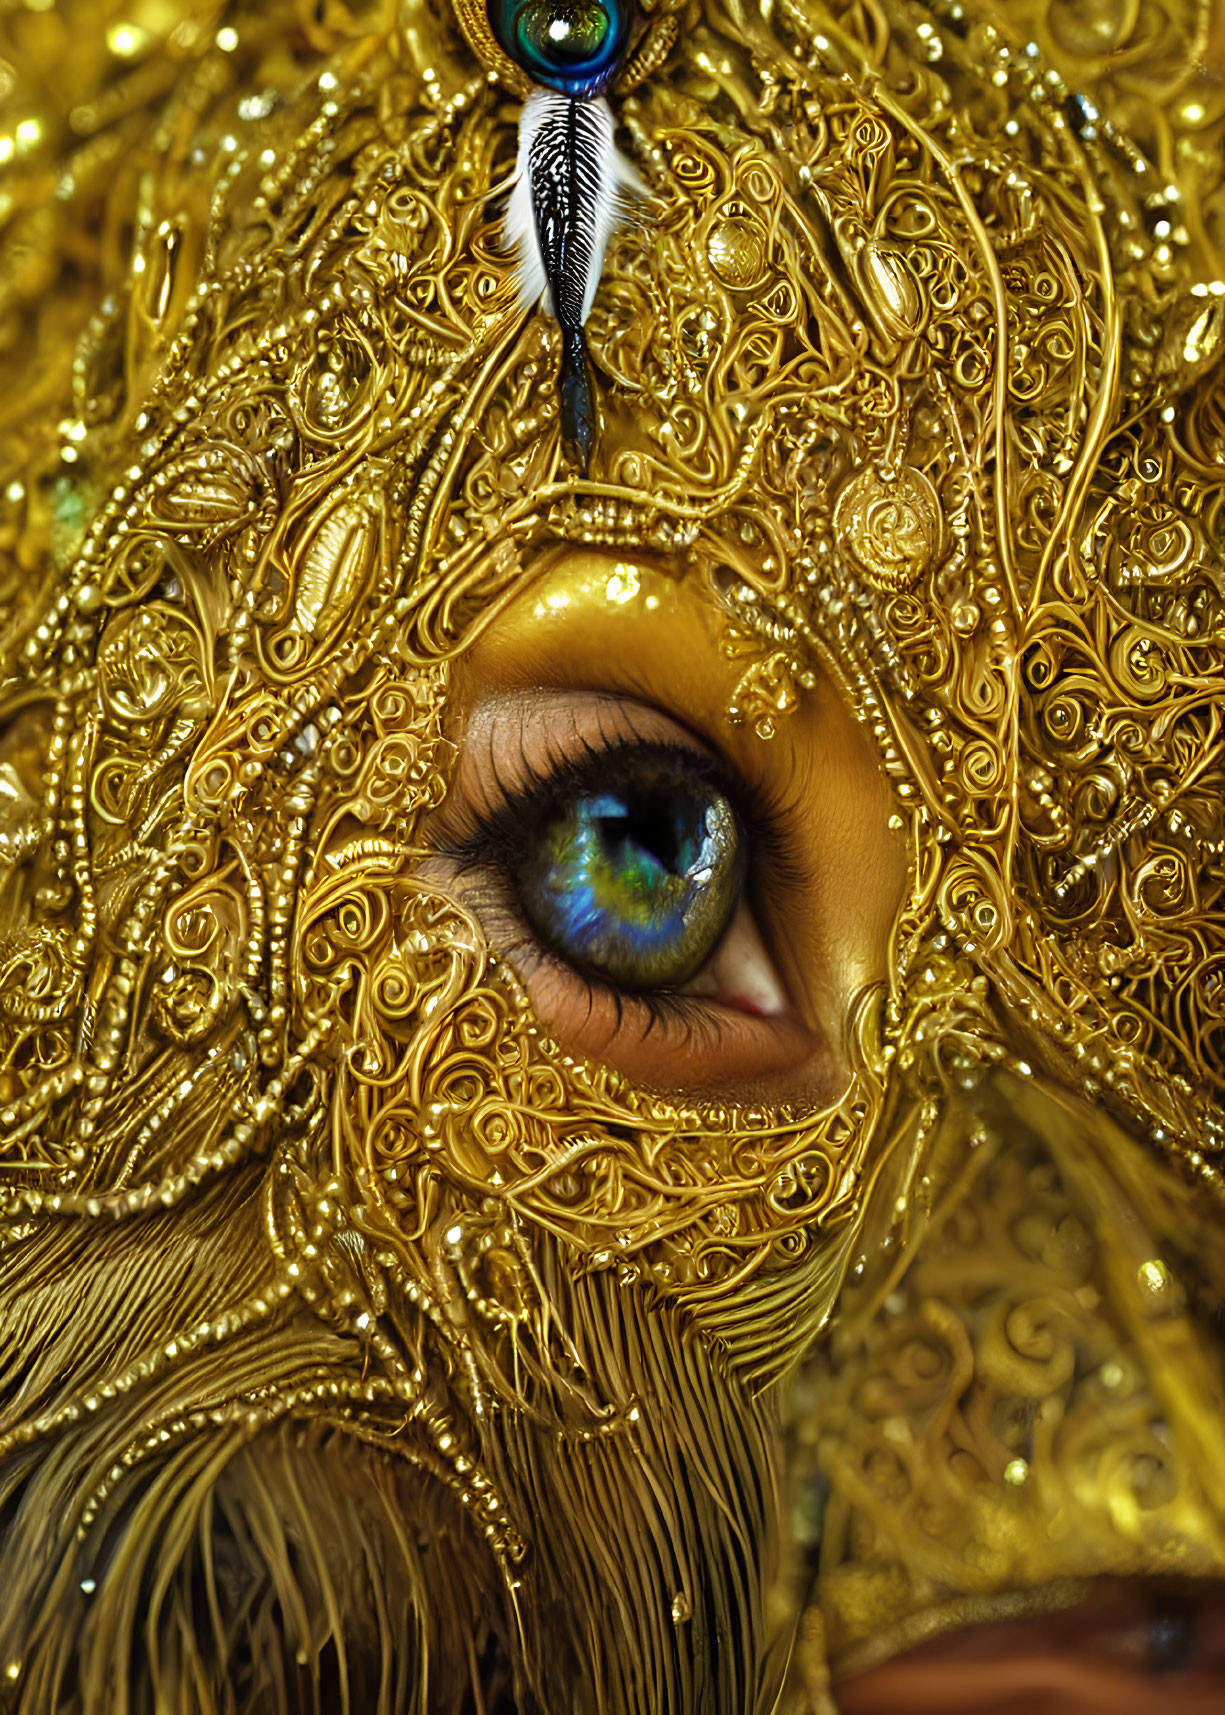 Intricate golden filigree eye with peacock feather accent